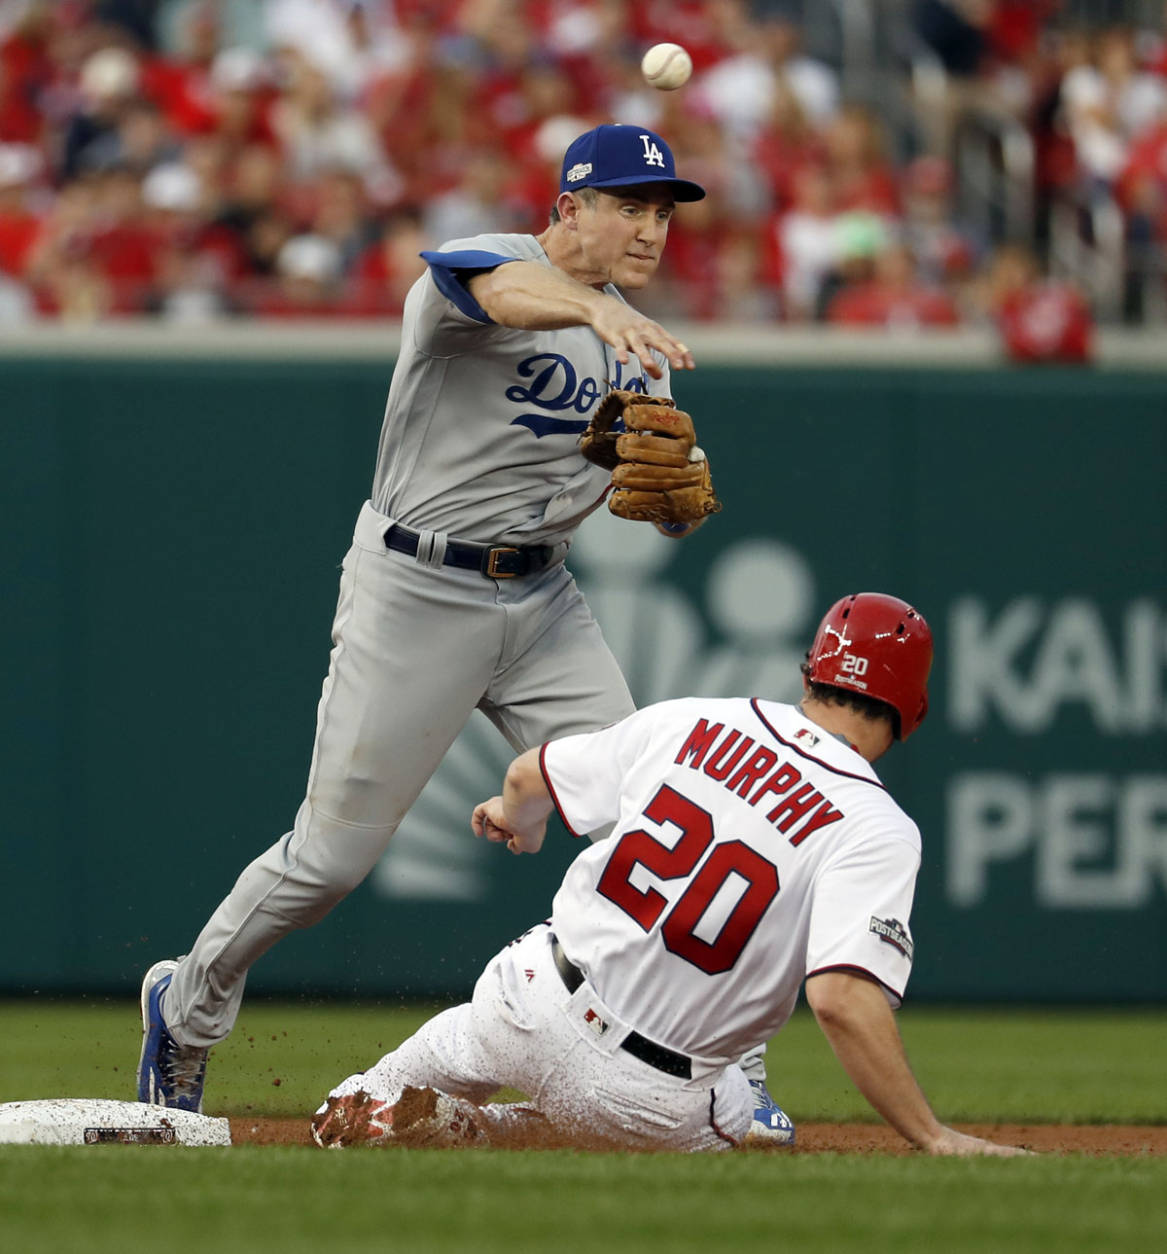 Los Angeles Dodgers second baseman Chase Utley throws to first base after getting the out on Washington Nationals' Daniel Murphy, but can't get the double play on Anthony Rendon during the second inning of Game 1 of a baseball National League Division Series, at Nationals Park, Friday, Oct. 7, 2016, in Washington. (AP Photo/Alex Brandon)